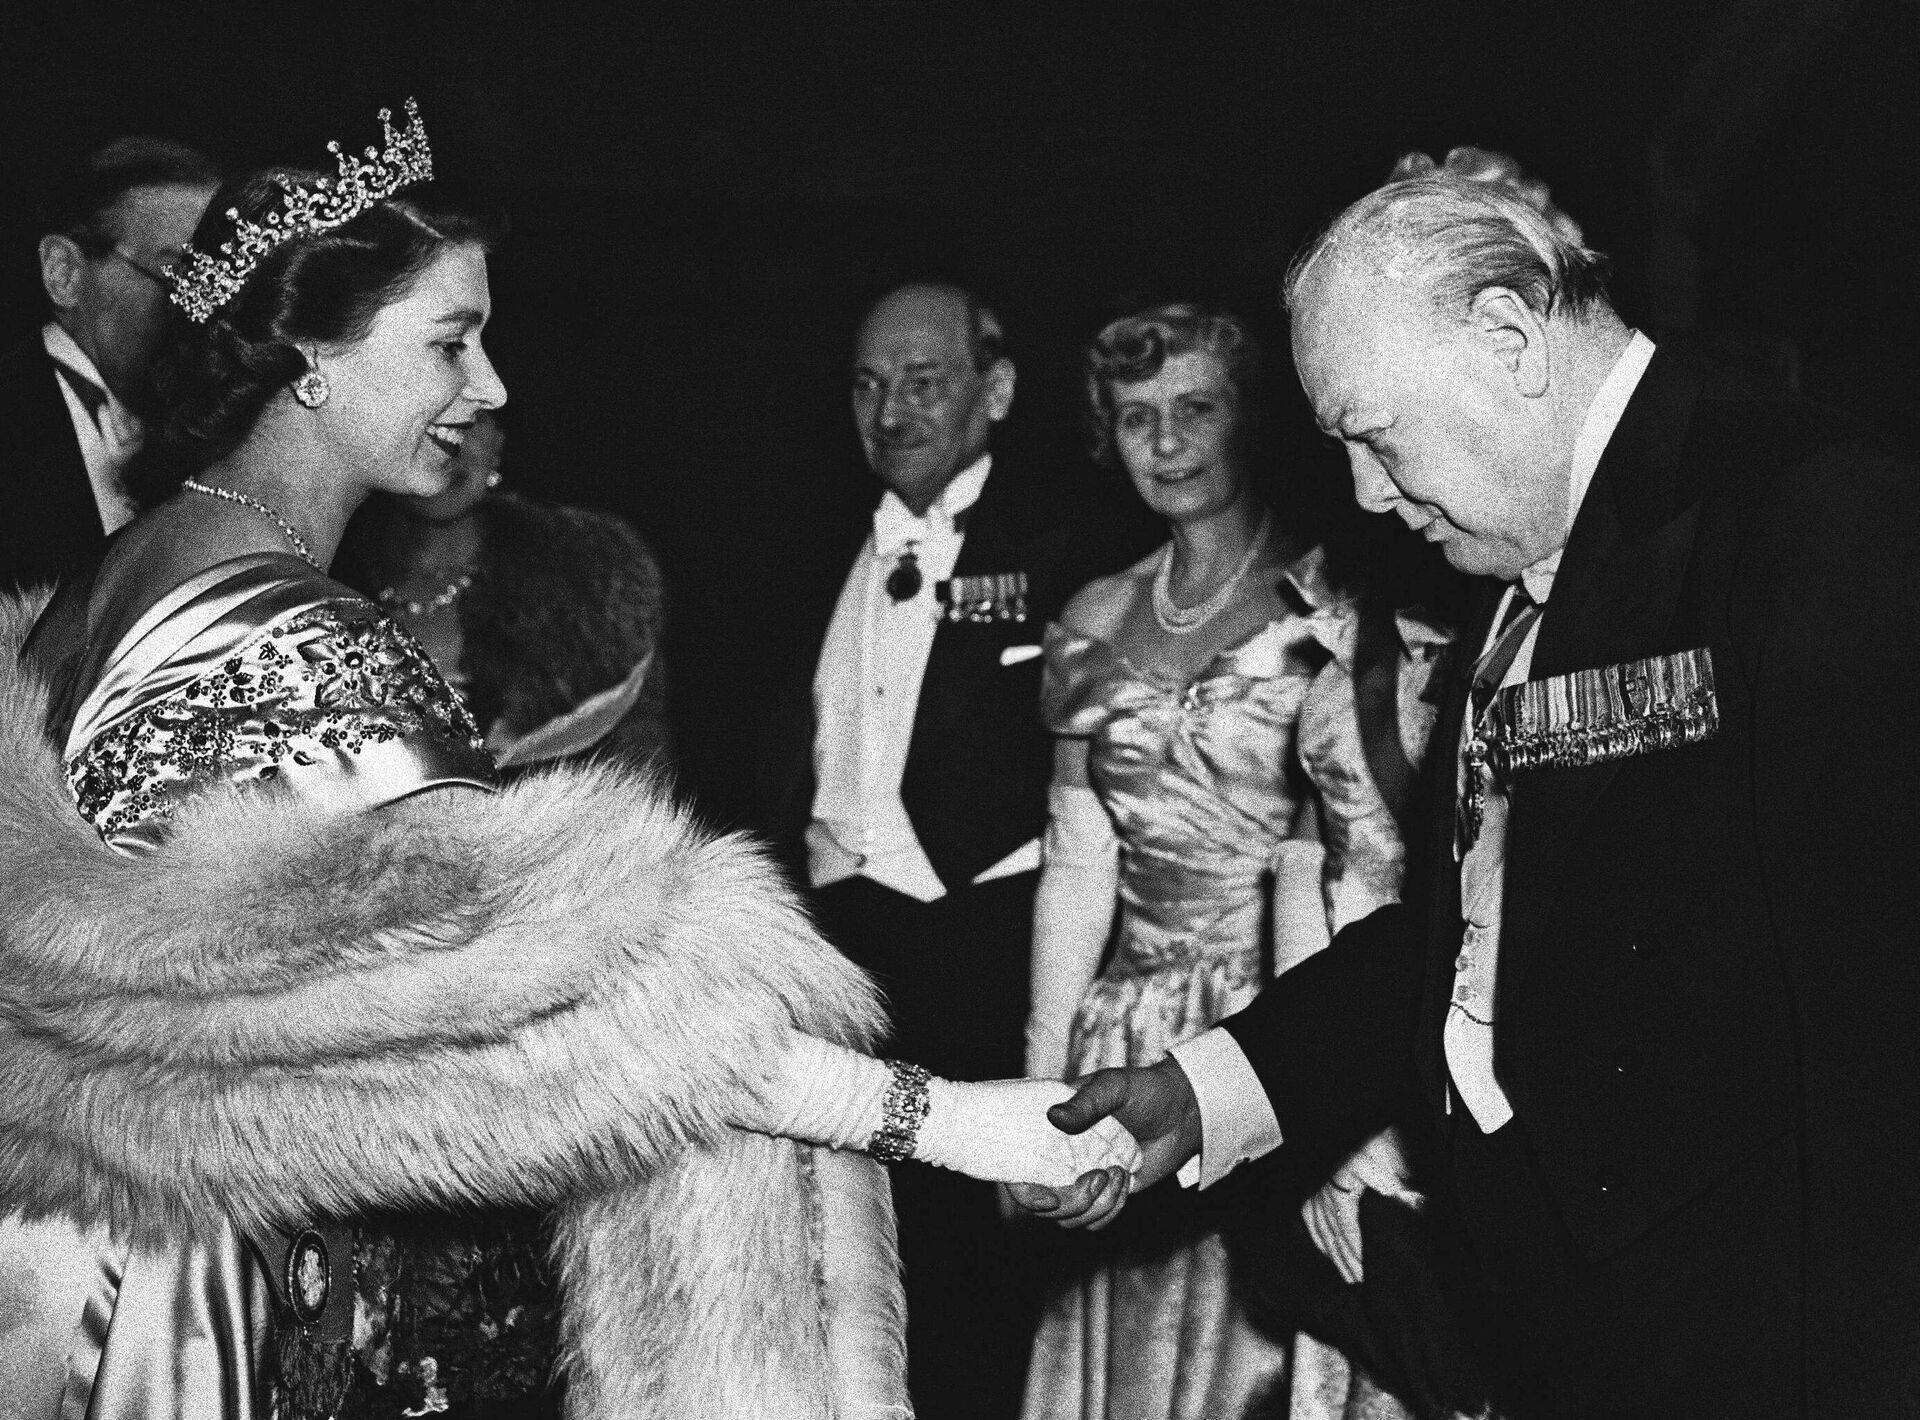 FILE - In this March 22, 1950 file photo, Britain's Princess Elizabeth shakes hands with Winston Churchill, former British Prime Minister, at a dinner to mark the launching of the Lord Mayor's National Thanksgiving Fund in London,. In background are Prime Minister Clement Attlee and his wife Violet. - Sputnik International, 1920, 09.09.2022